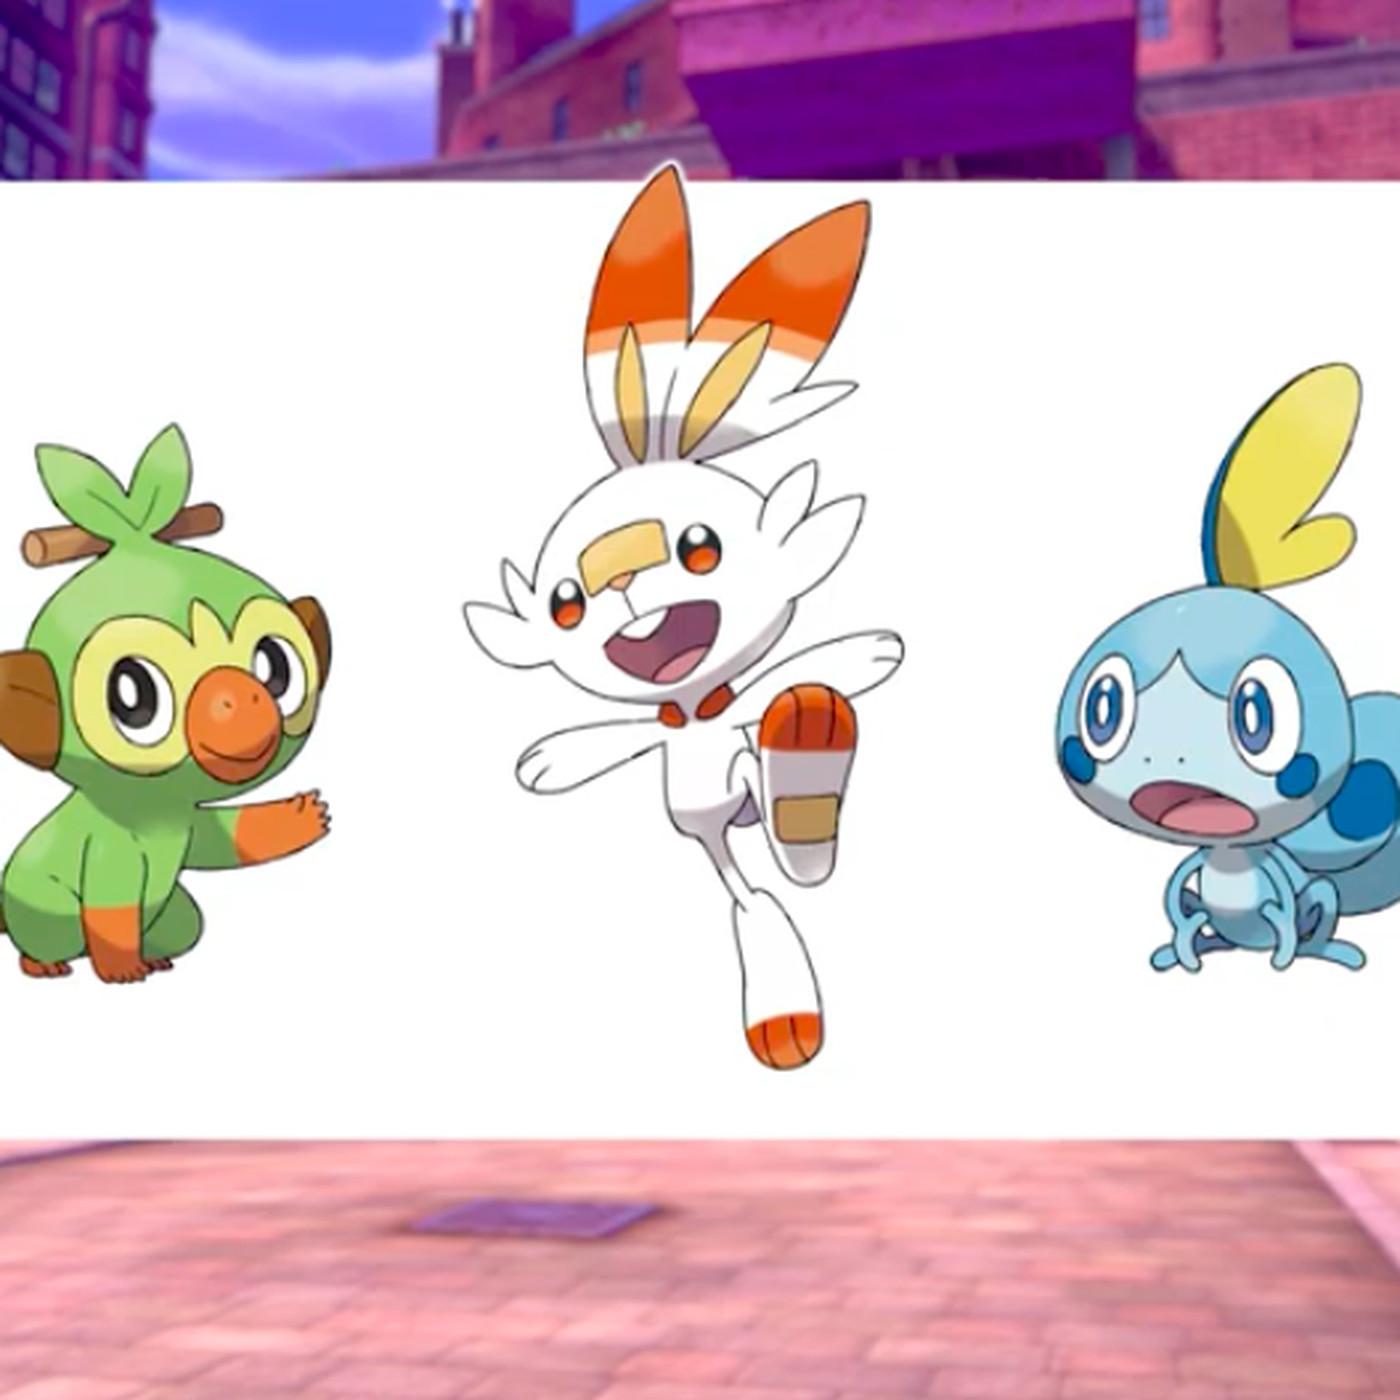 Pokémon Sword and Shield's new starters announced